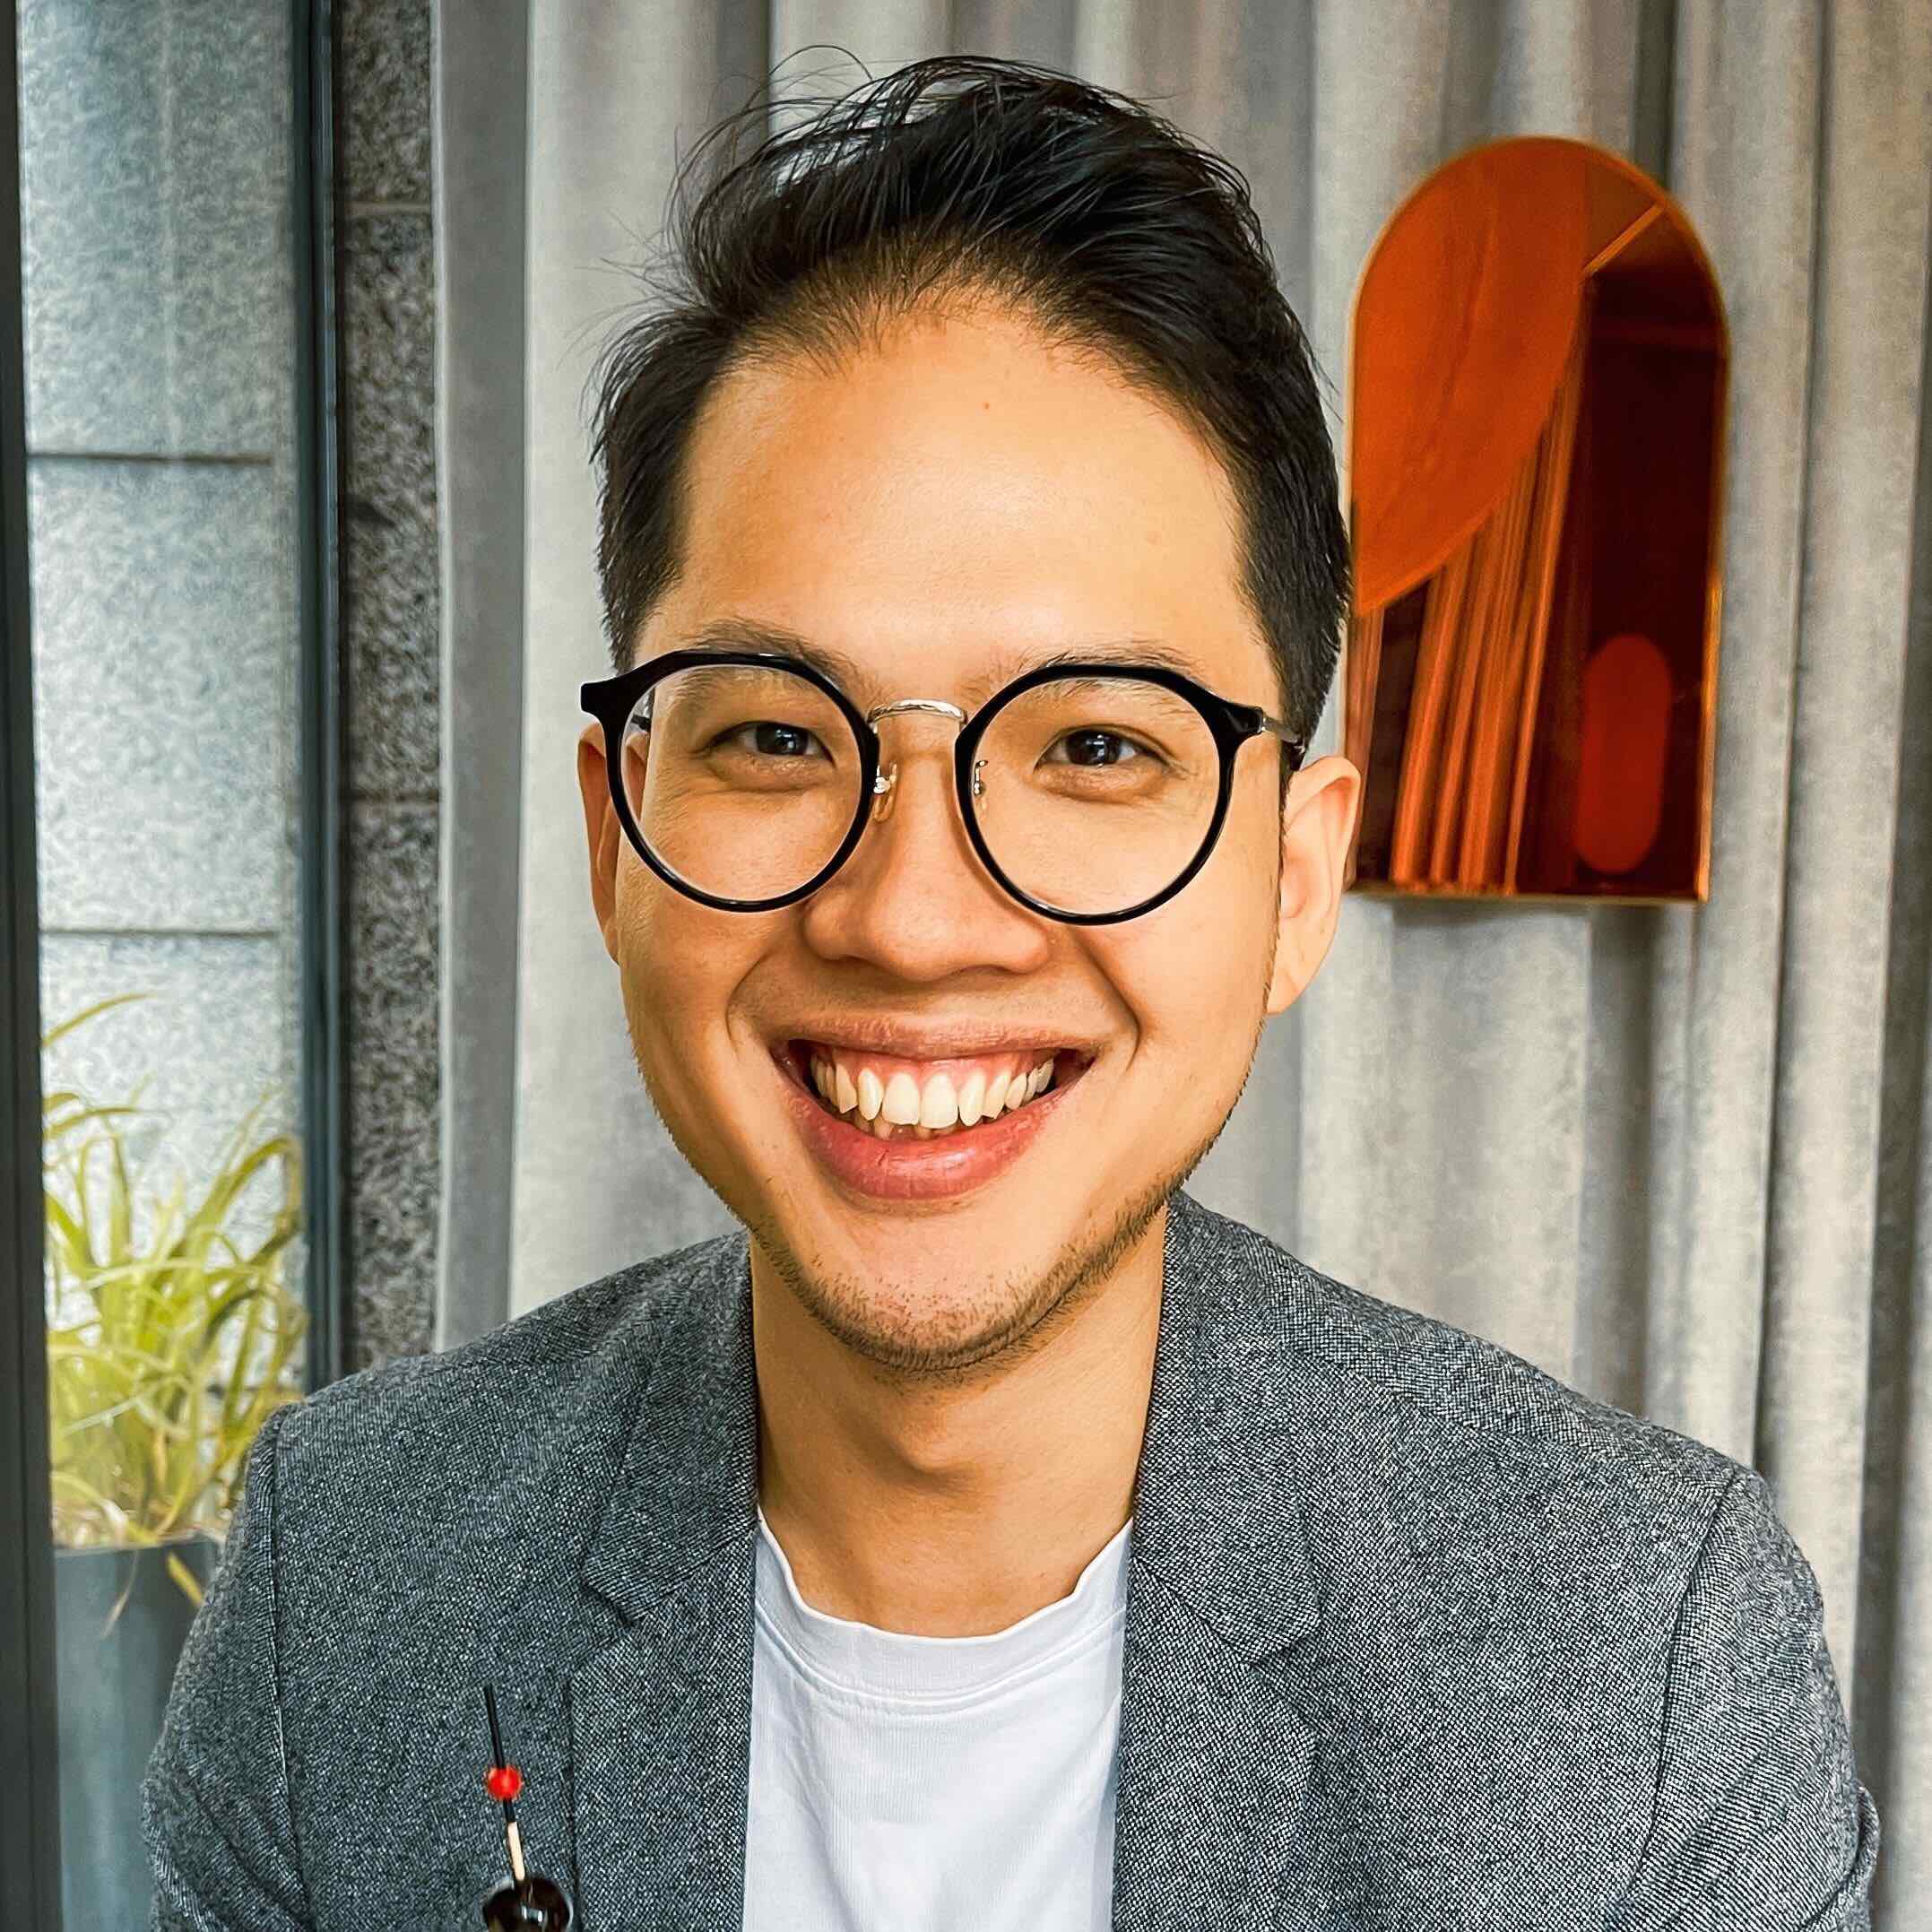 Andy Nguyen, VP of Marketing for Time Doctor